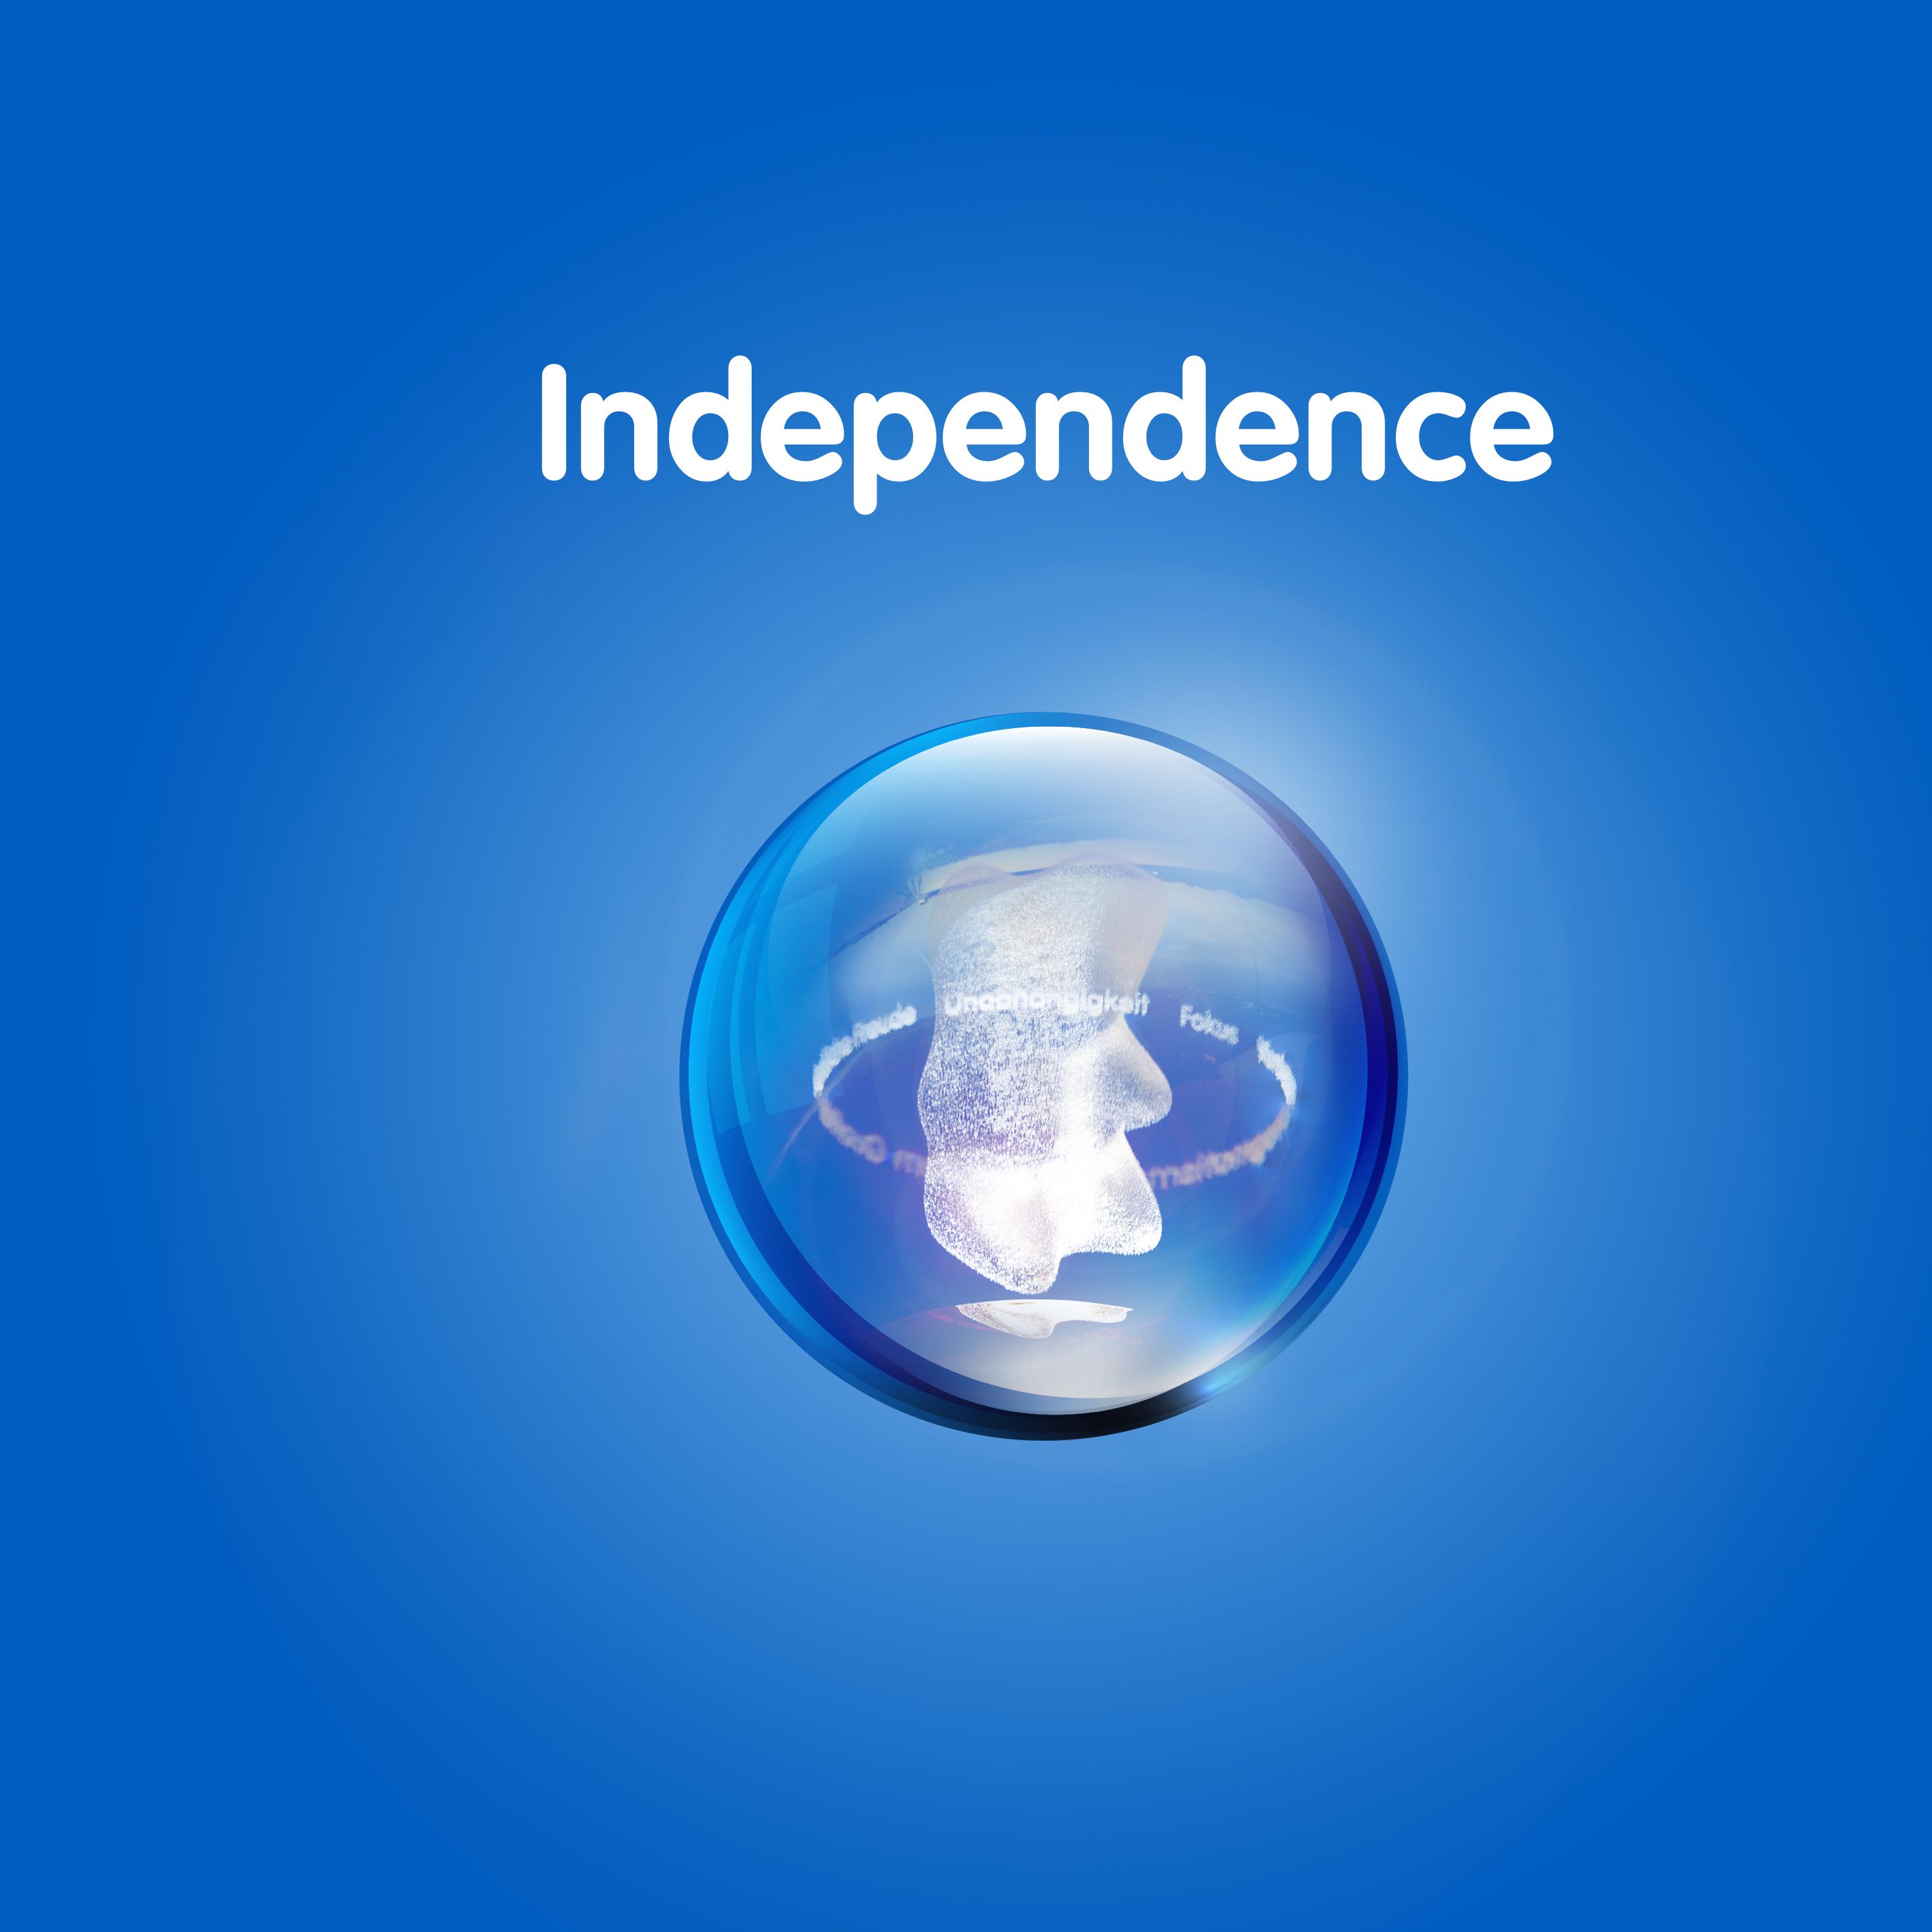 Graphic with Goldbear in transparent ball against blue background with text: ‘Independence’